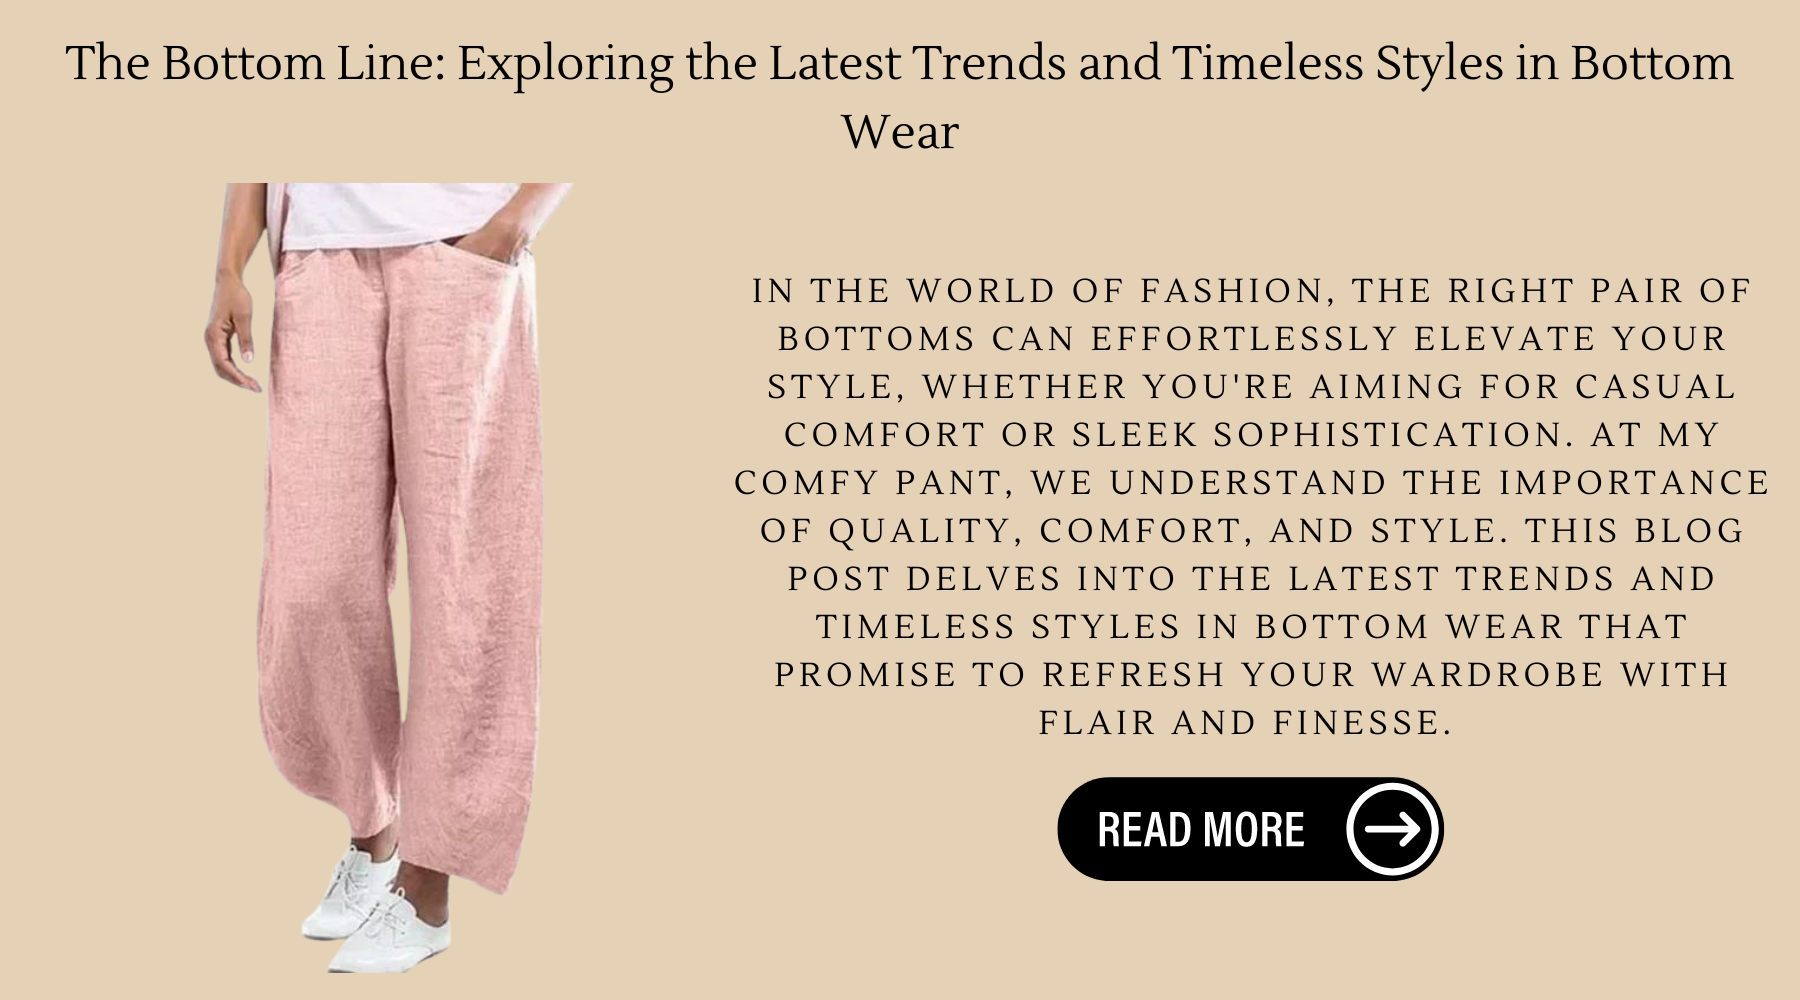 The Bottom Line: Exploring the Latest Trends and Timeless Styles in Bottom Wear